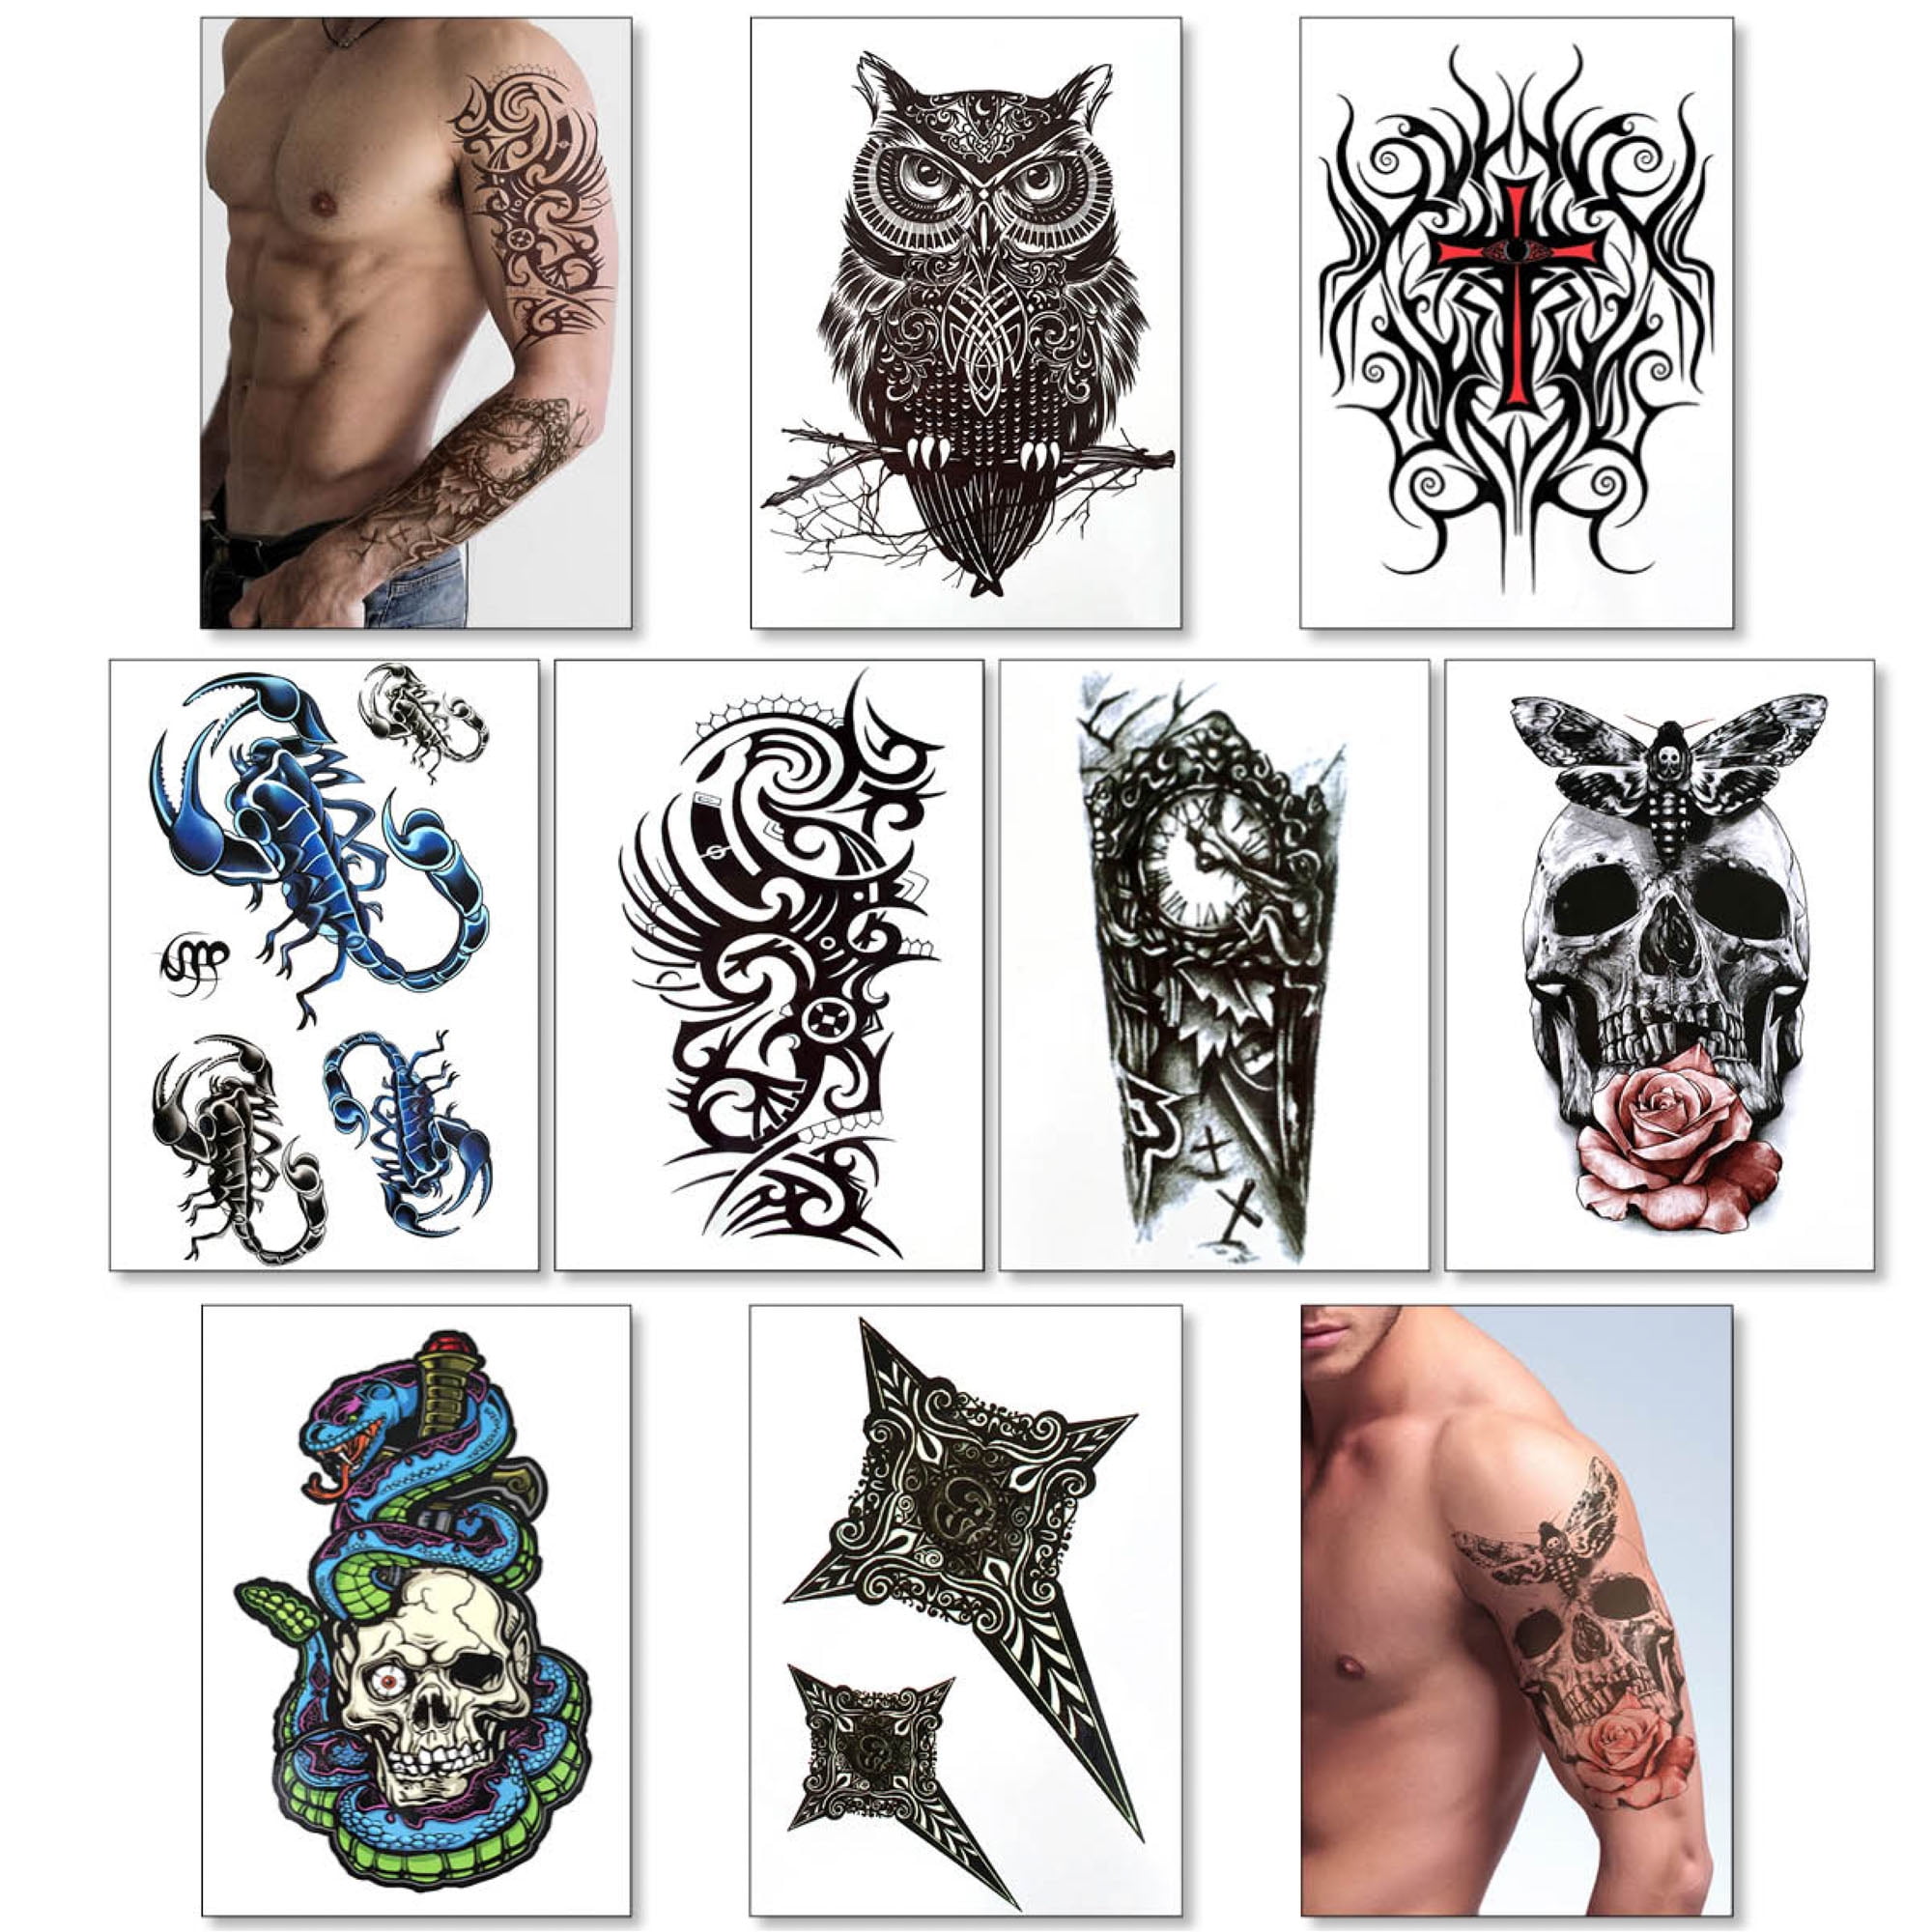 Temporary Tattoos For Men Guys Boys & Teens - Fake Half Arm Tattoos Sleeves For Arms Shoulders Chest Back Legs Cross Skull Owl Clock Scorpion Rose Realistic Waterproof Transfers 8 Sheets 8x6" -